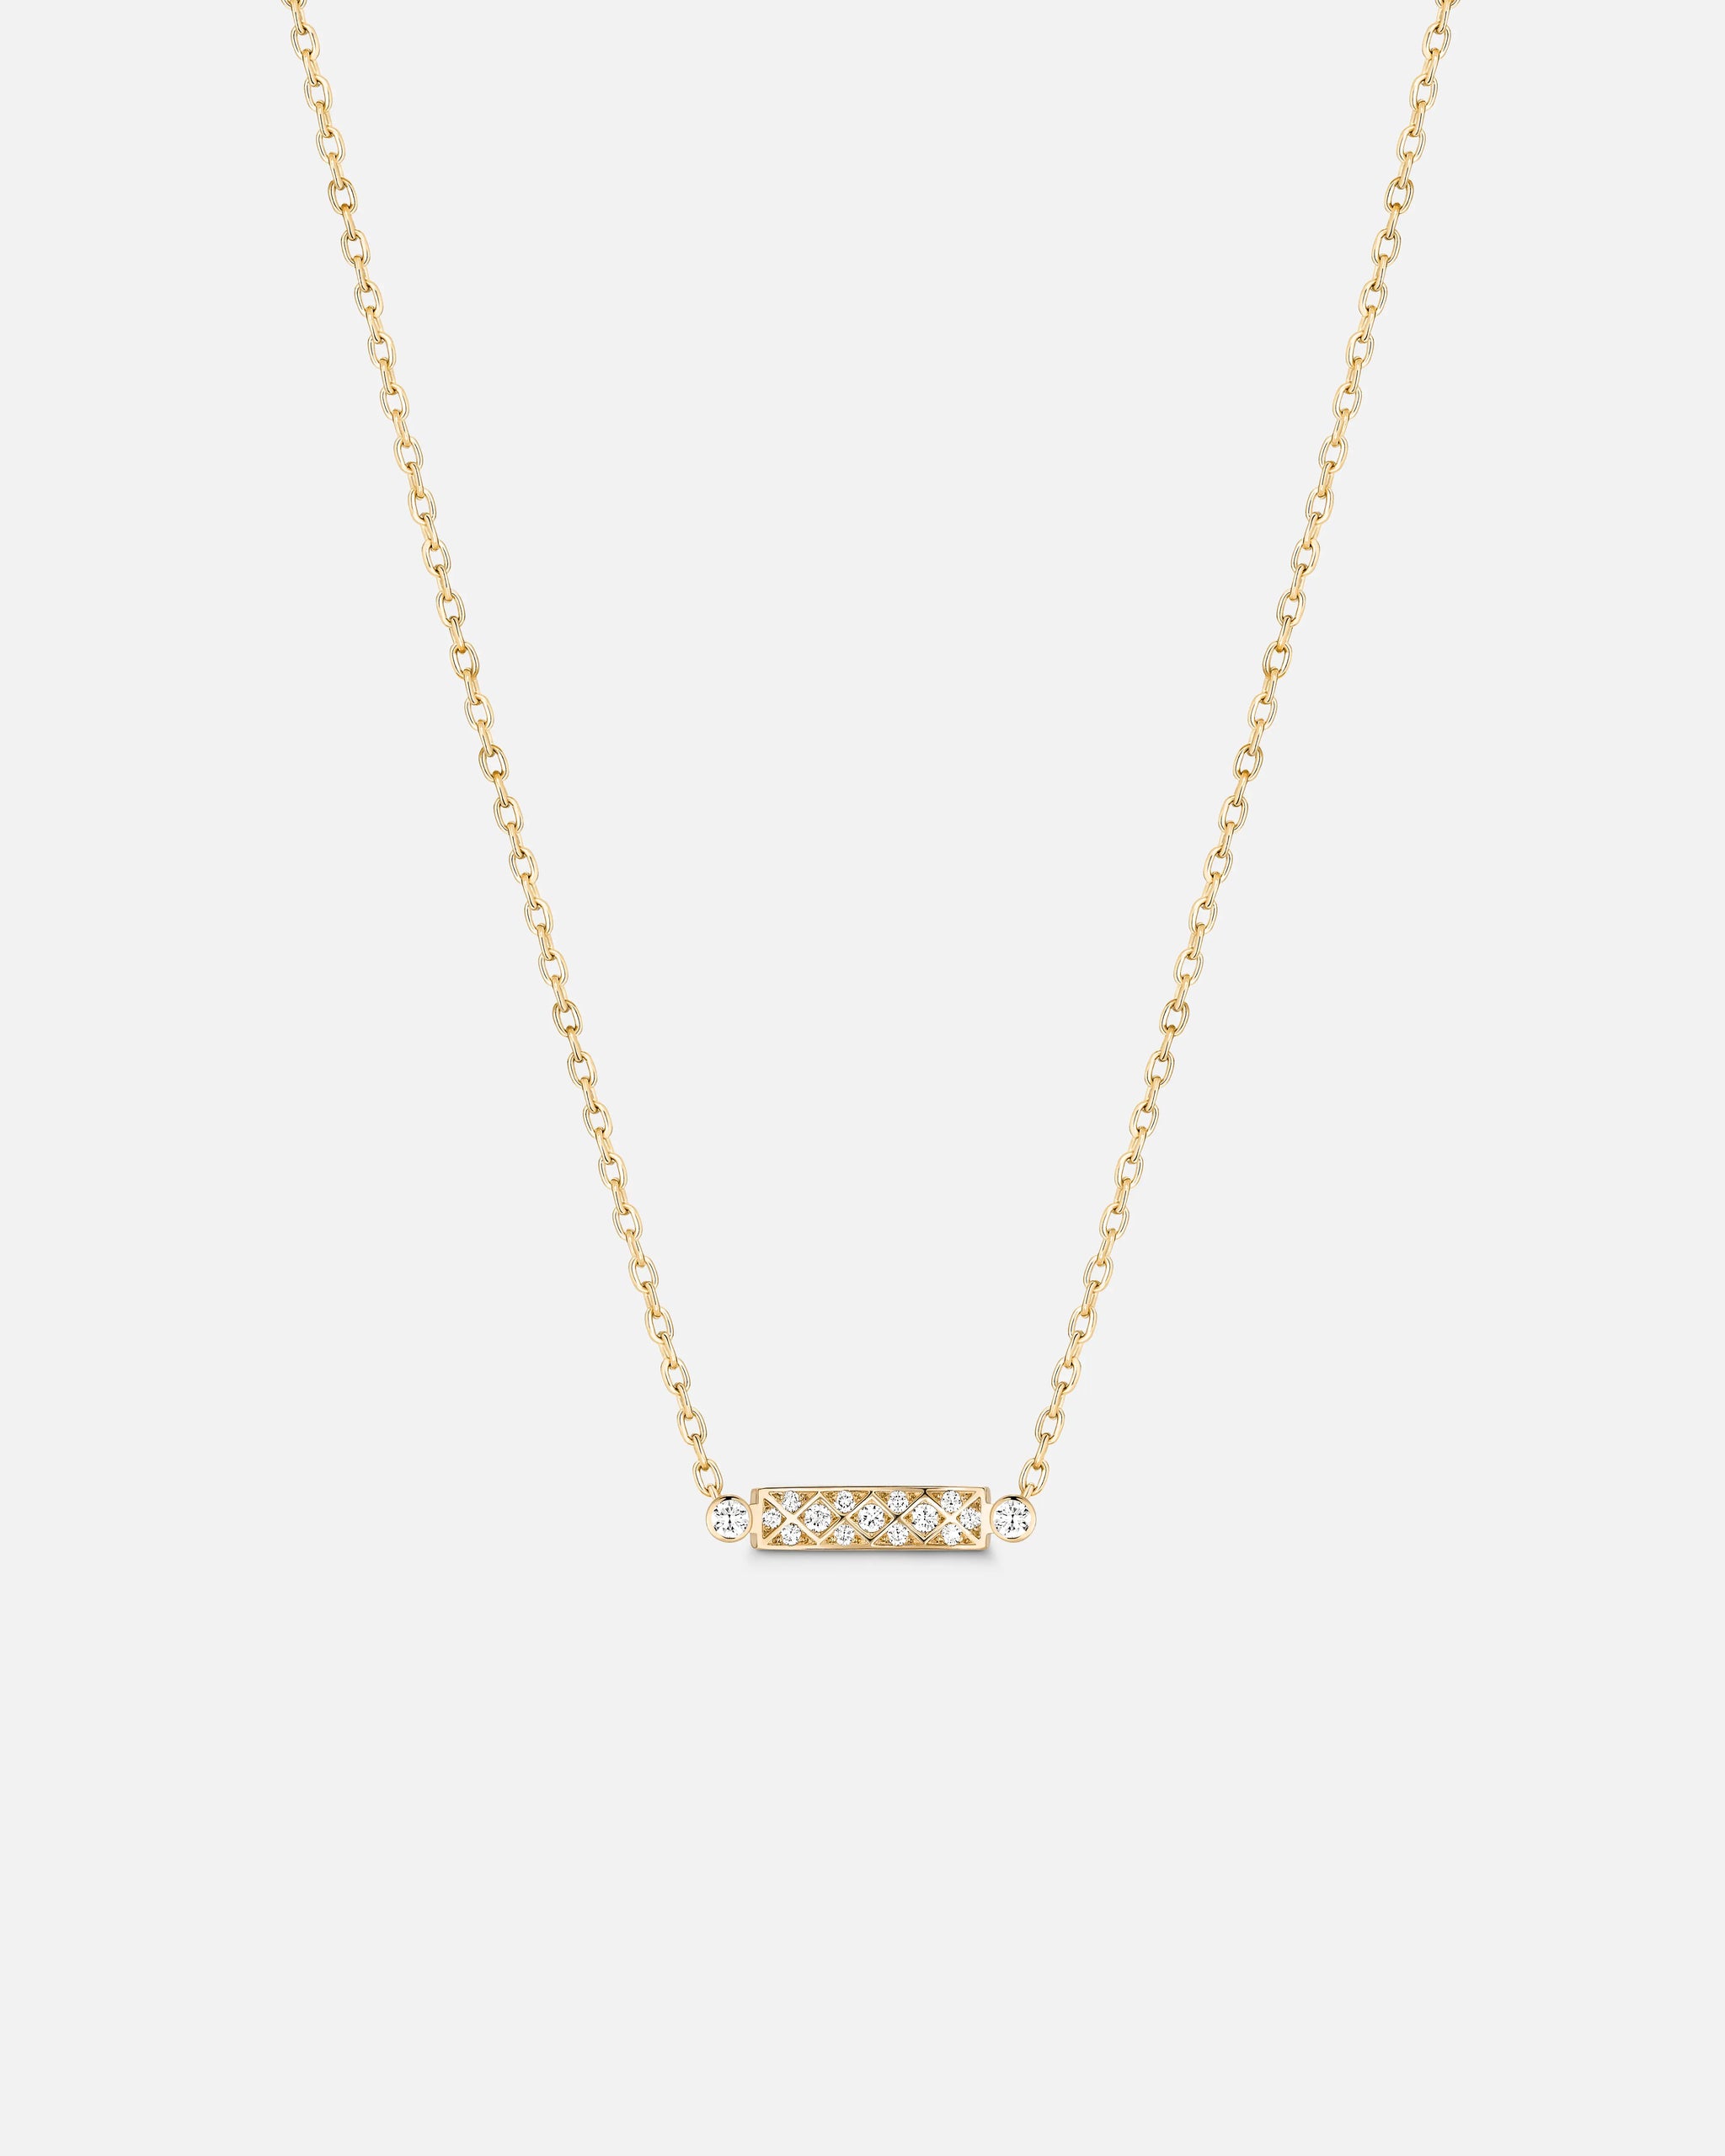 Parisian Stroll Mood Pendant in Yellow Gold - 1 - Nouvel Heritage